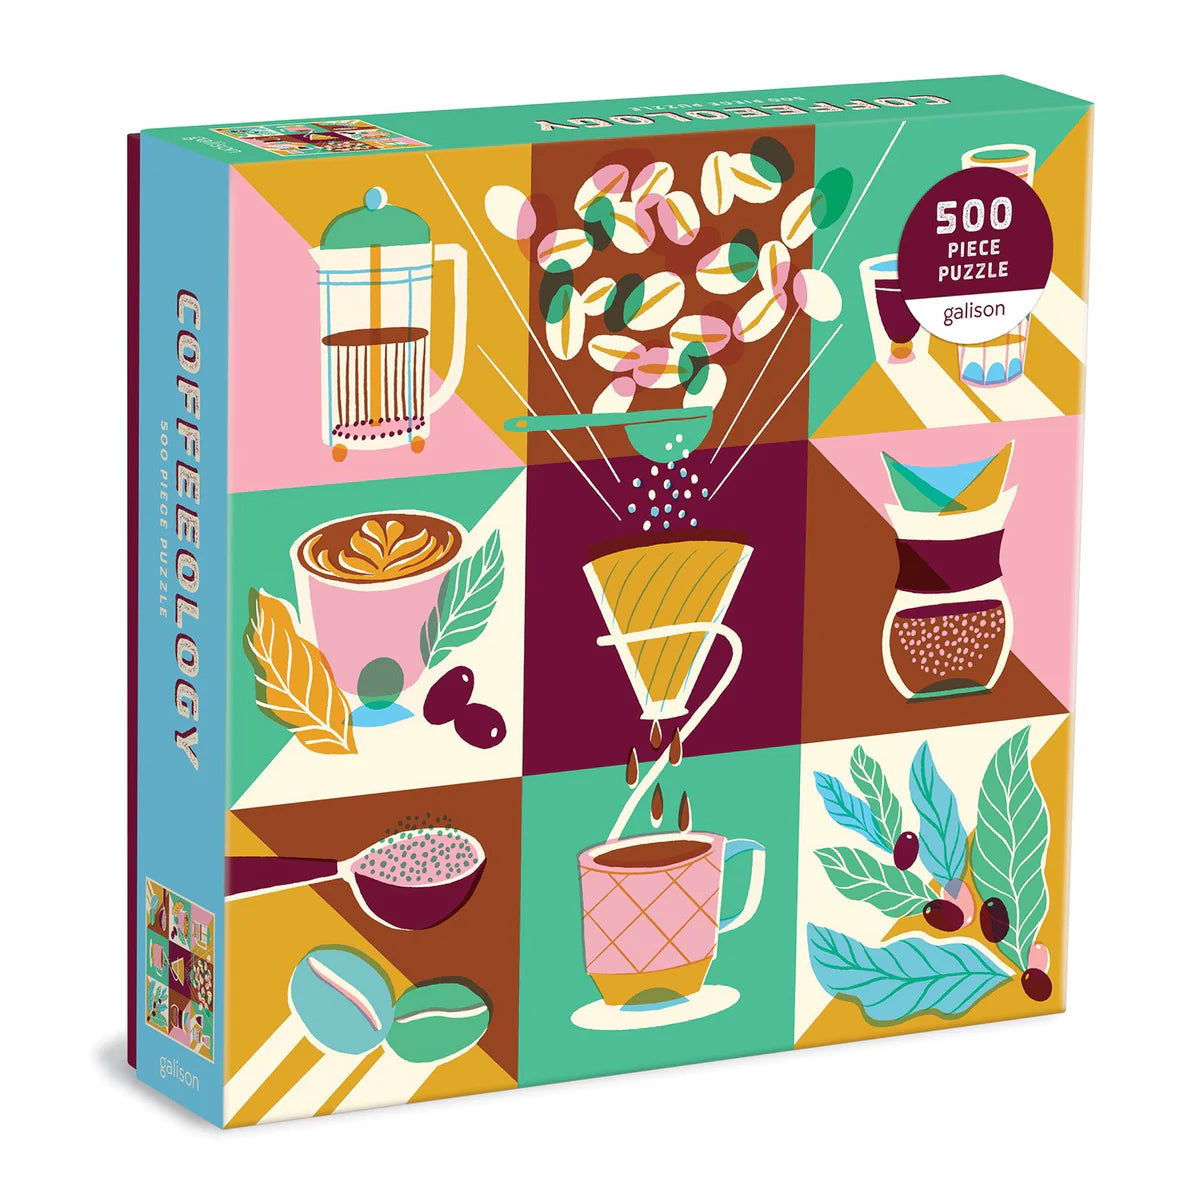 Coffeeology Jigsaw Puzzle 500pcs by penny black